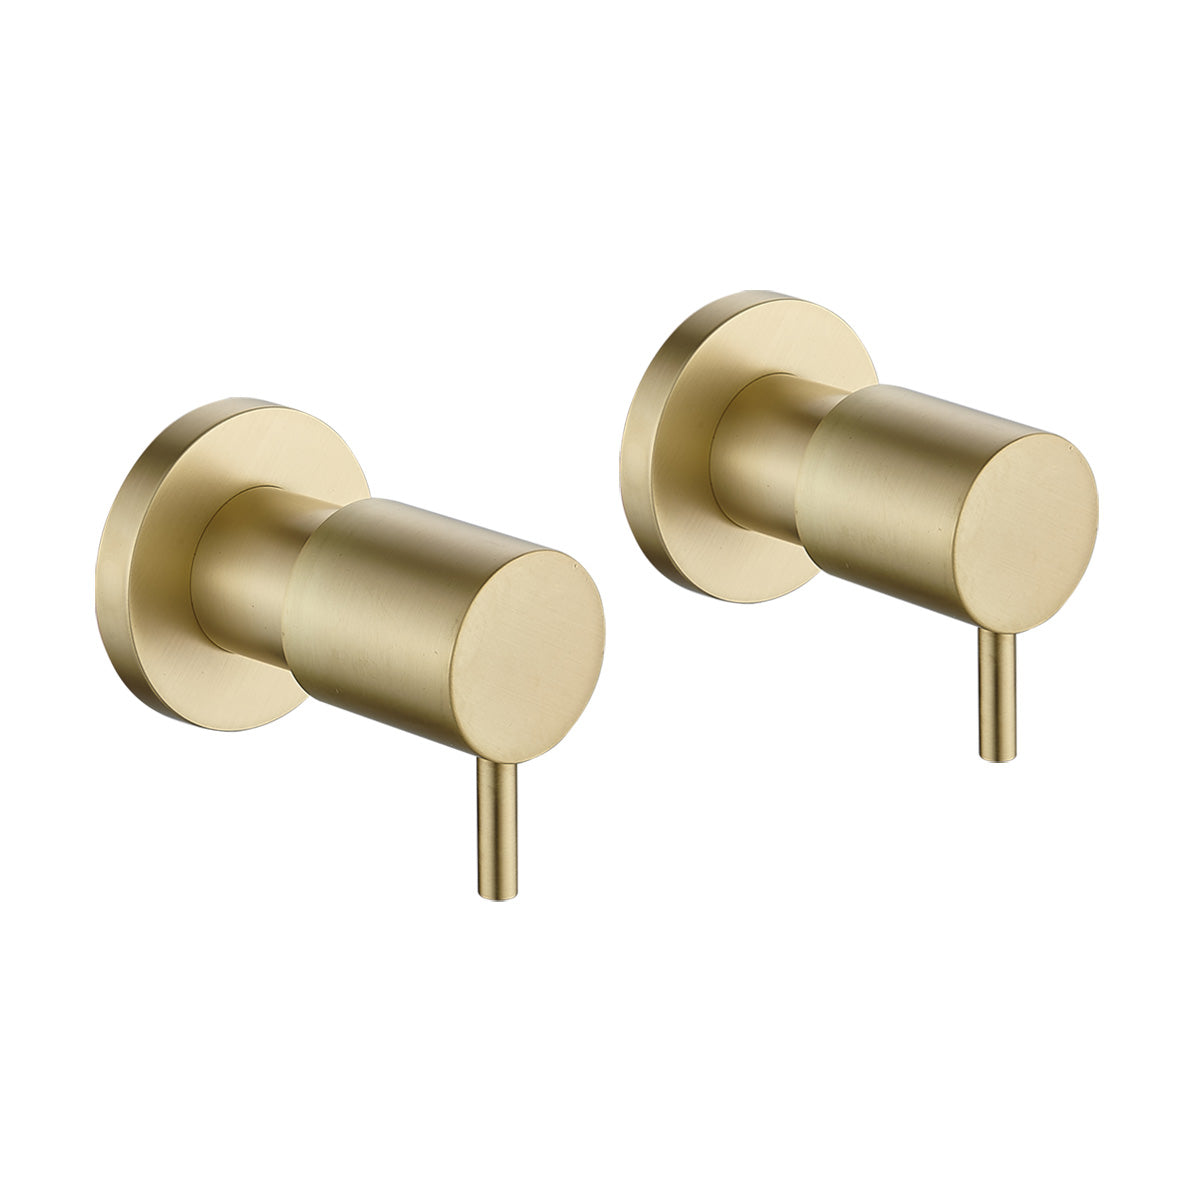 LXW1 (BG) / Luxury Wall Top Assemblies (Brushed Gold) - Hellycar Brushed Gold Quarter Turn Tap